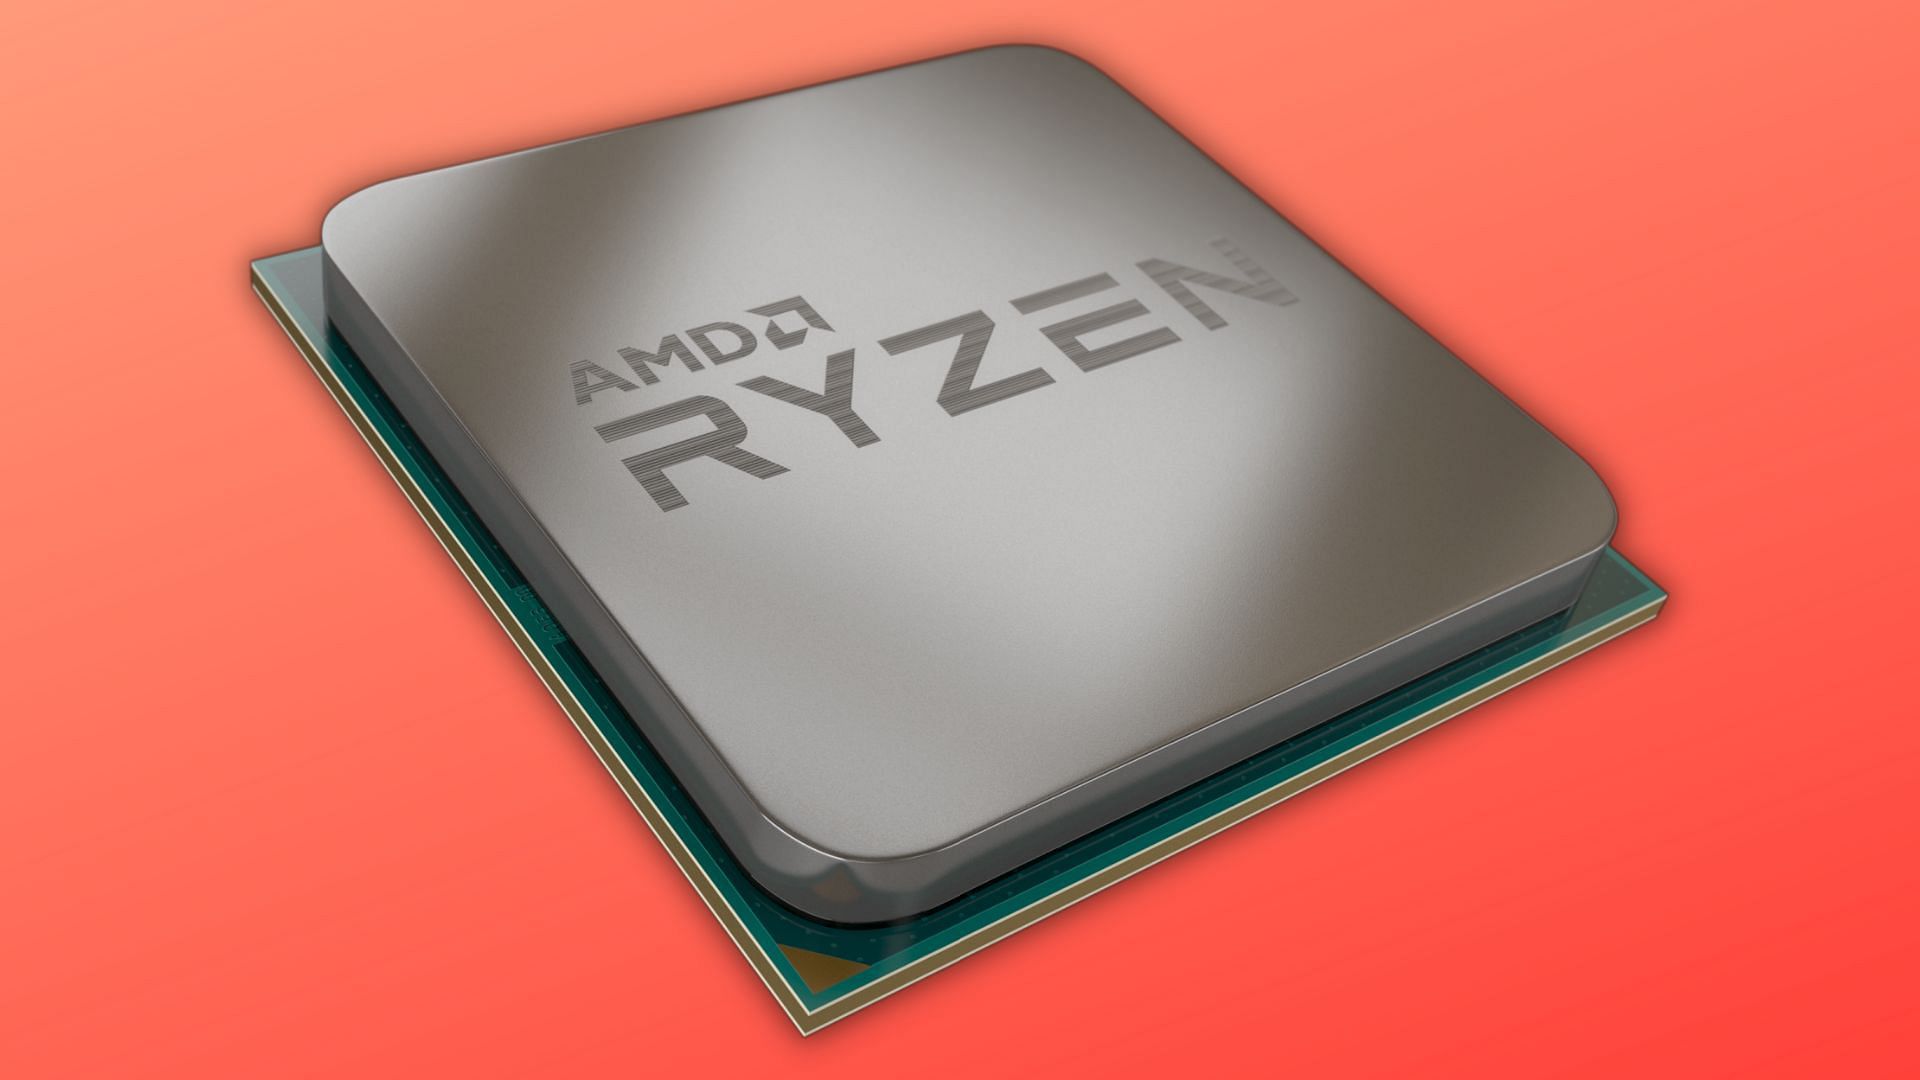 The Ryzen processors lead the gaming industry (Image via AMD)